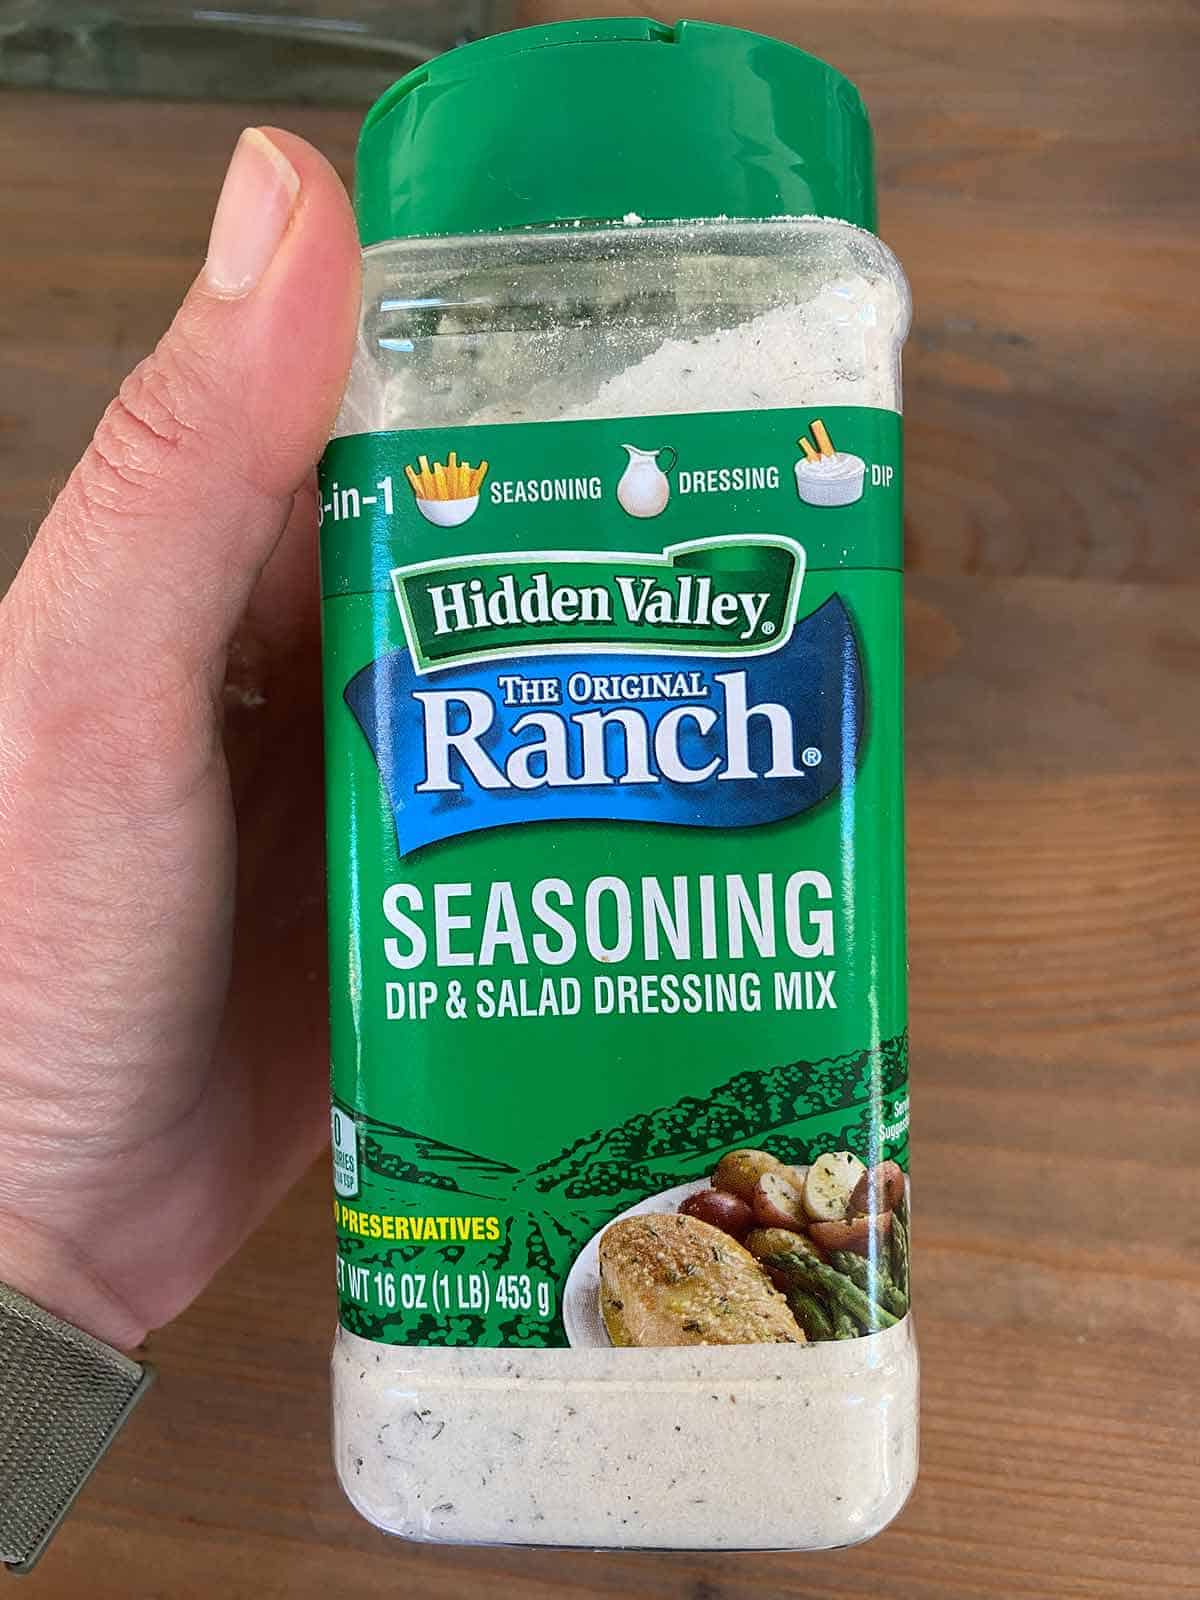 A container of Hidden Valley Ranch Seasoning